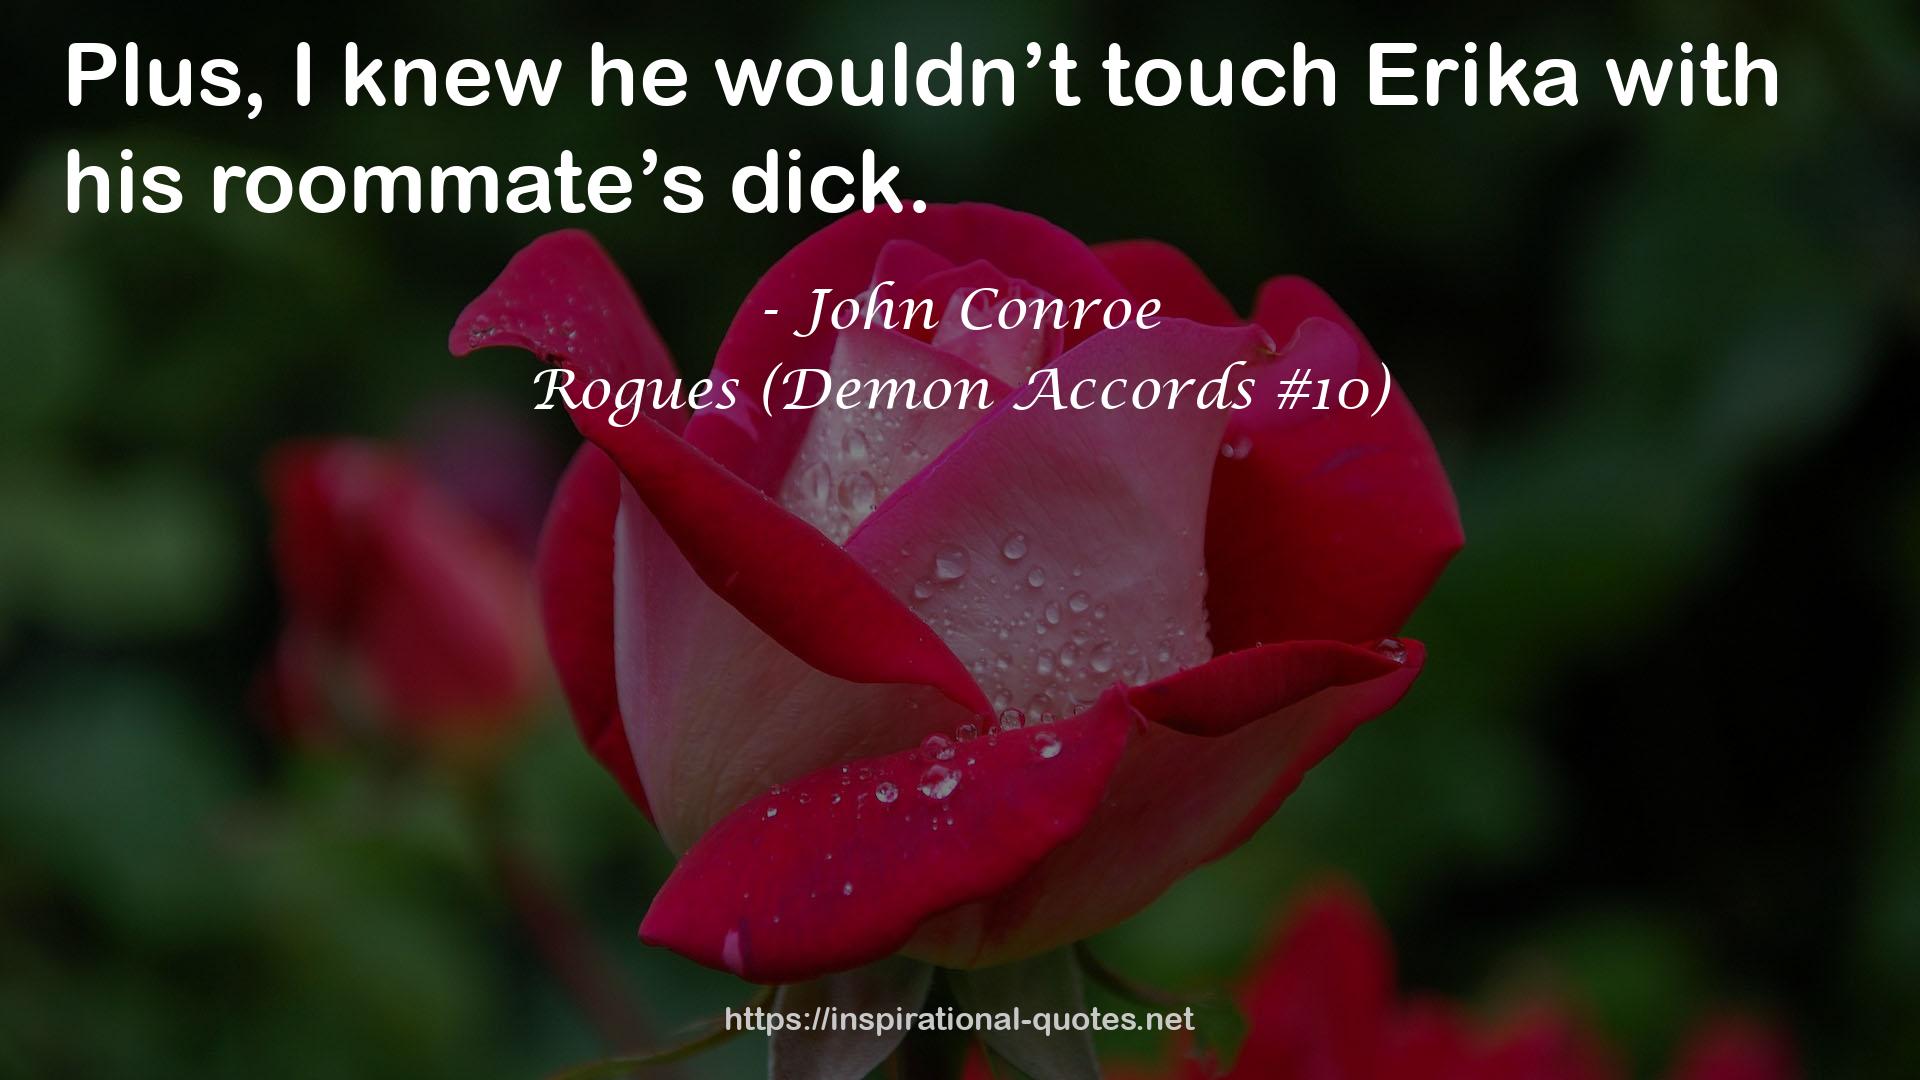 Rogues (Demon Accords #10) QUOTES